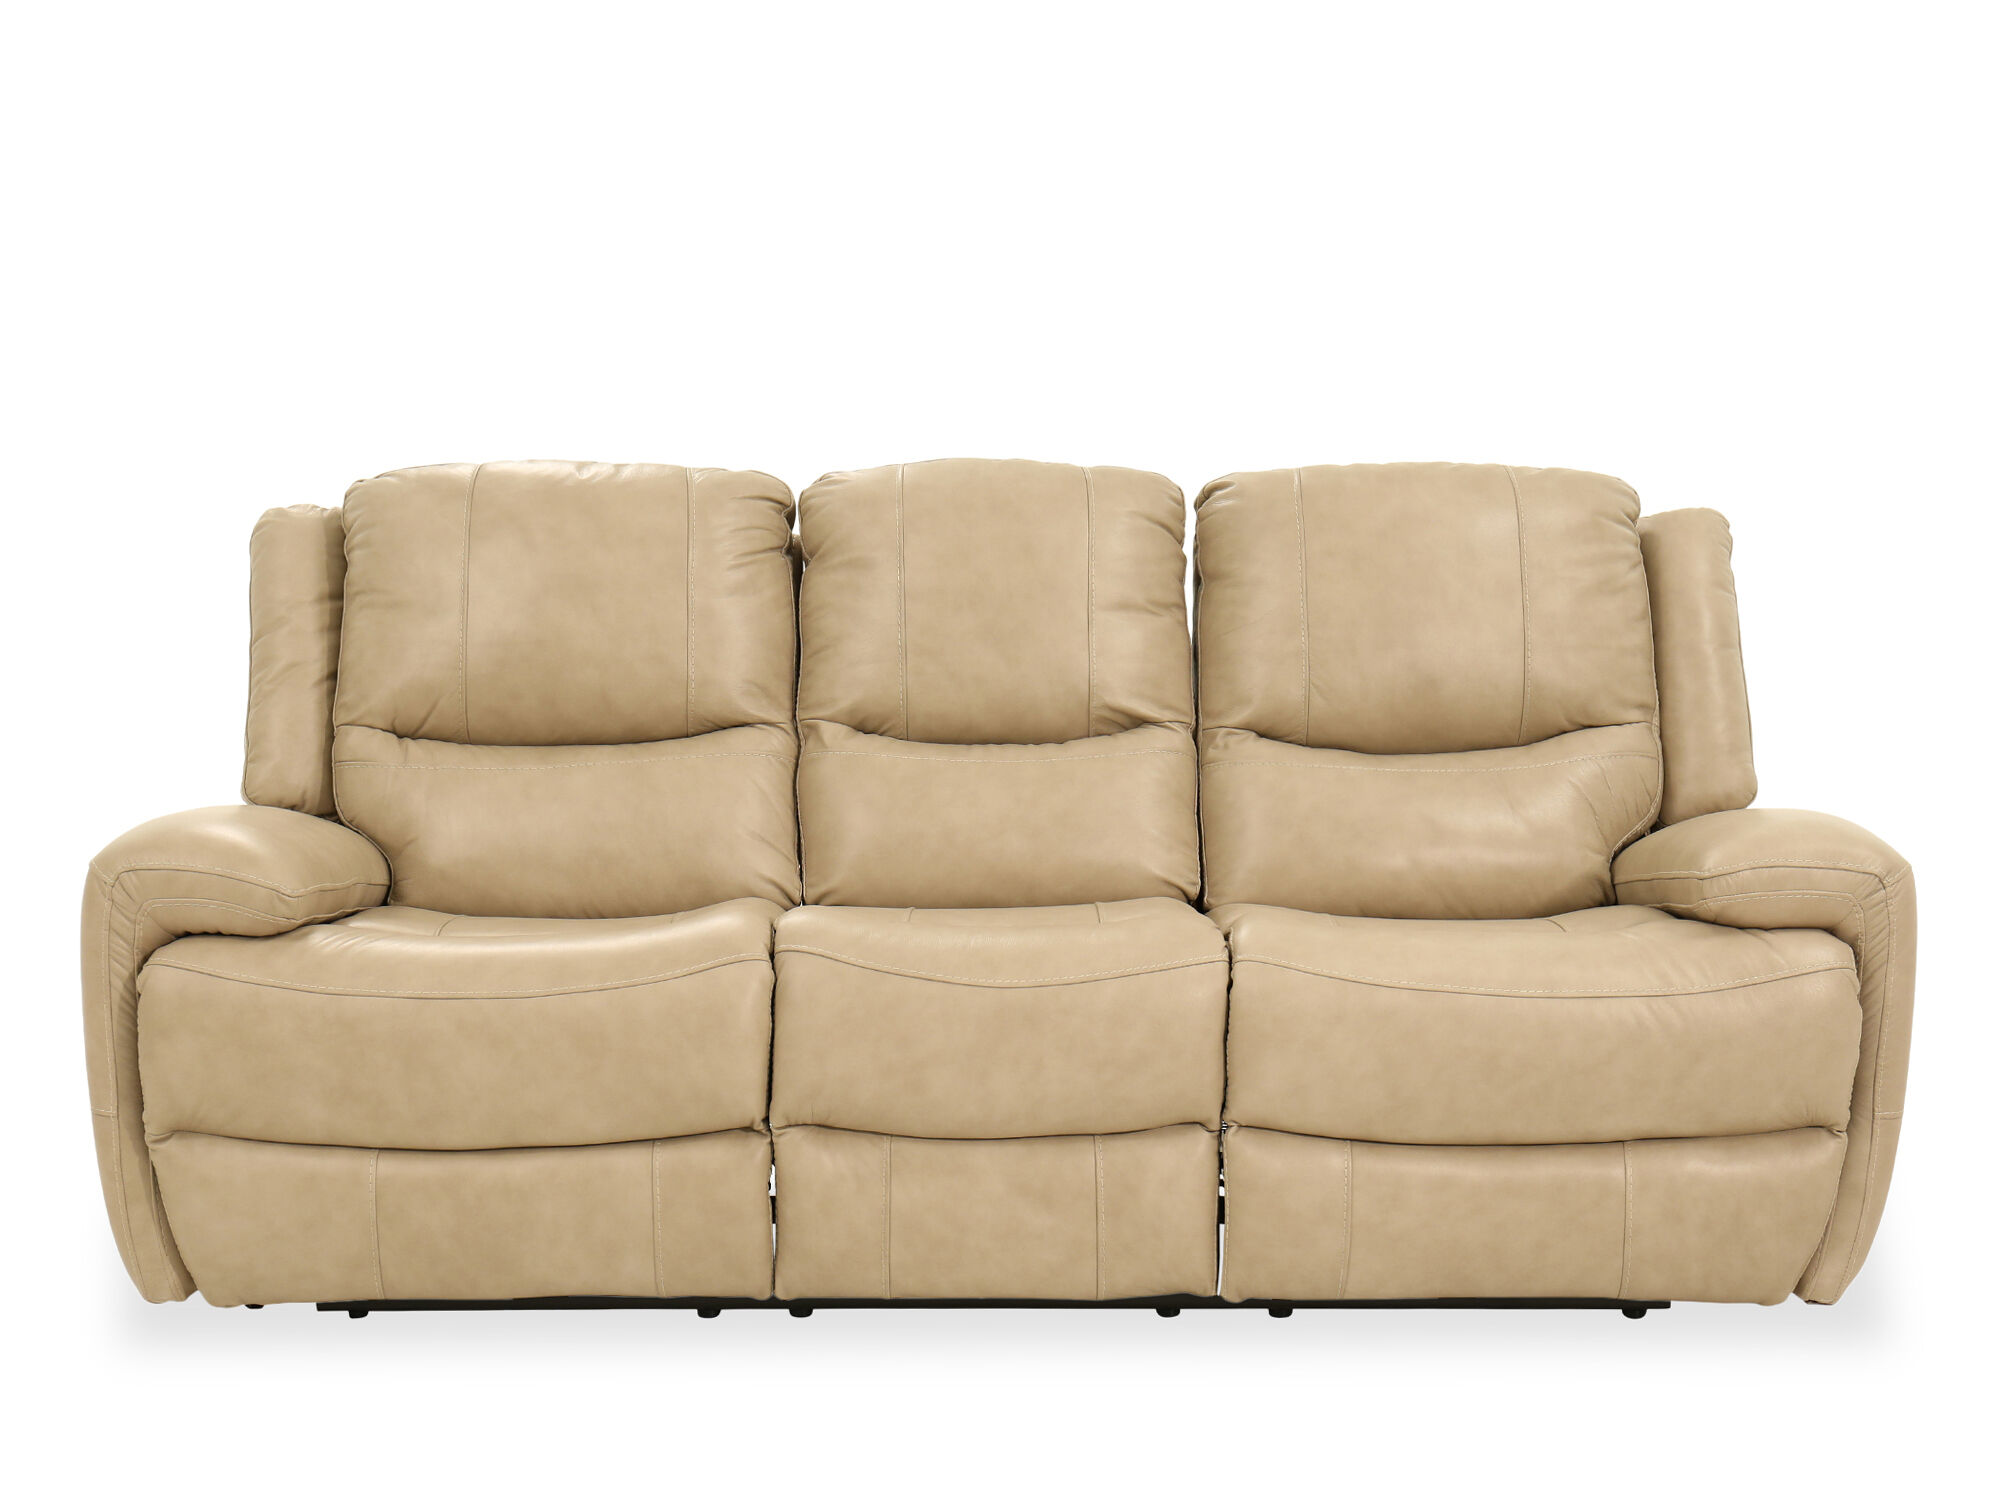 Leather Power Reclining Sofa In Stone, Tan Leather Recliner Sofa Set